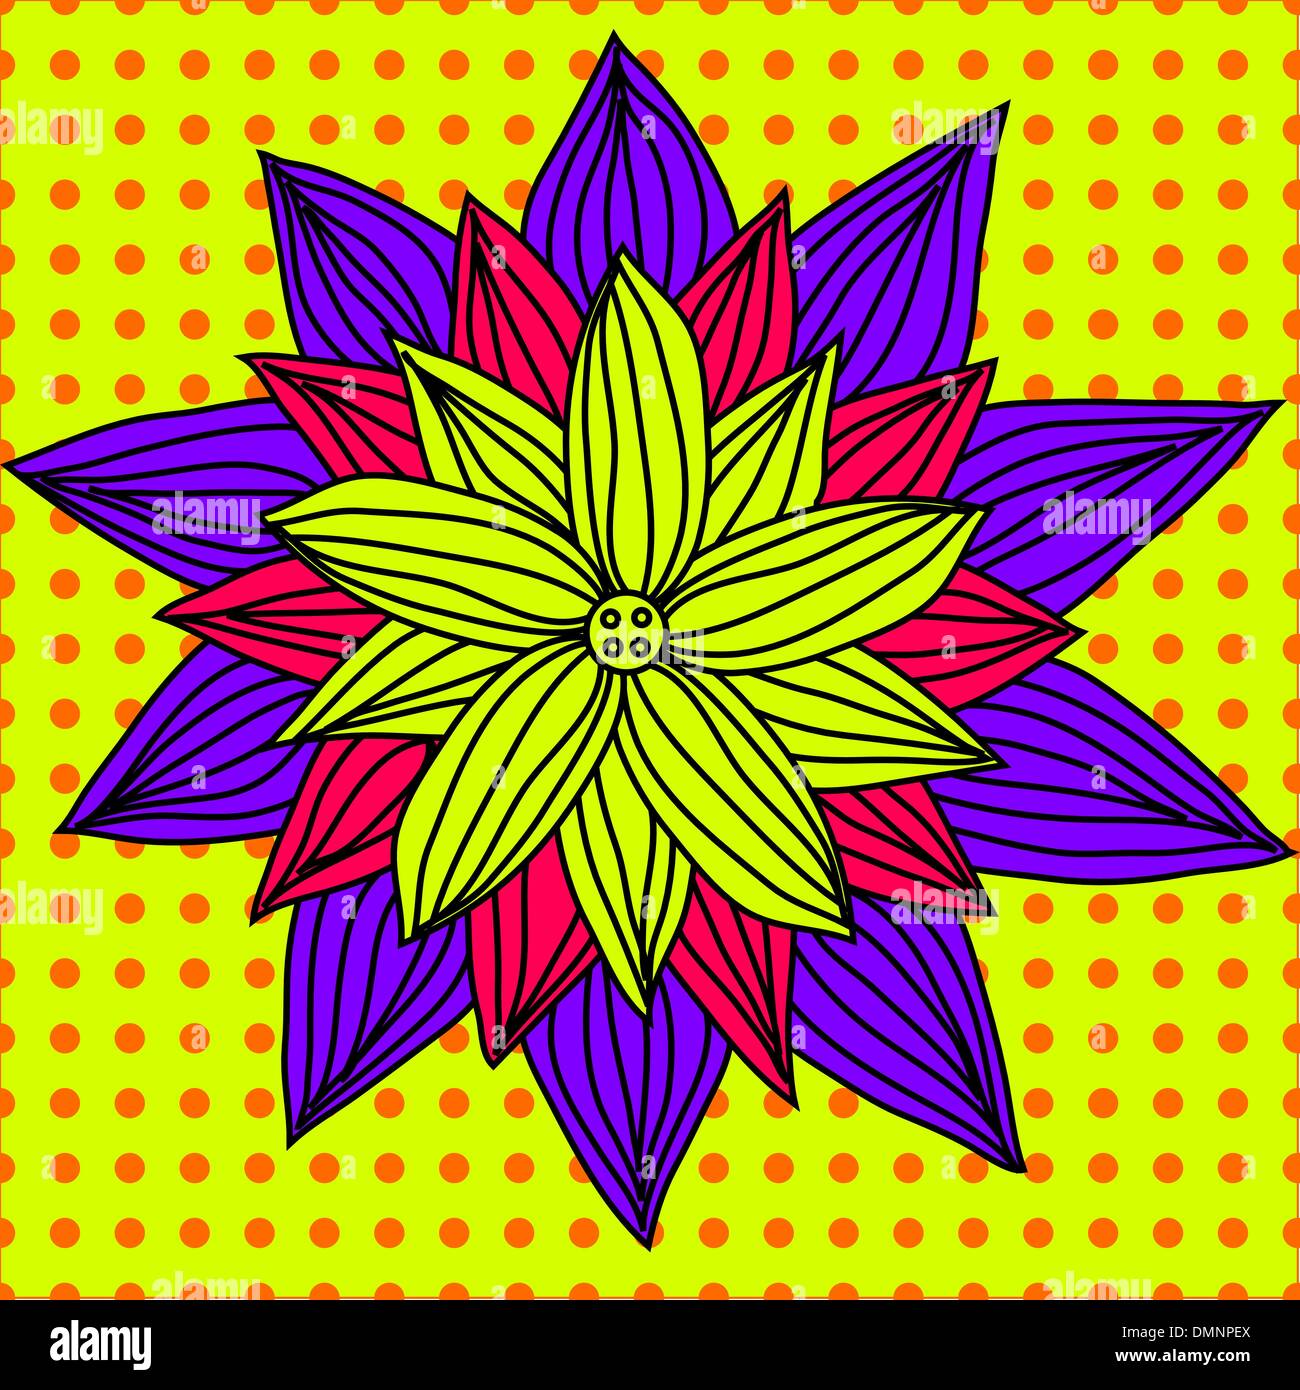 Circle summer doodle flower ornament. Made by trace from sketch ...